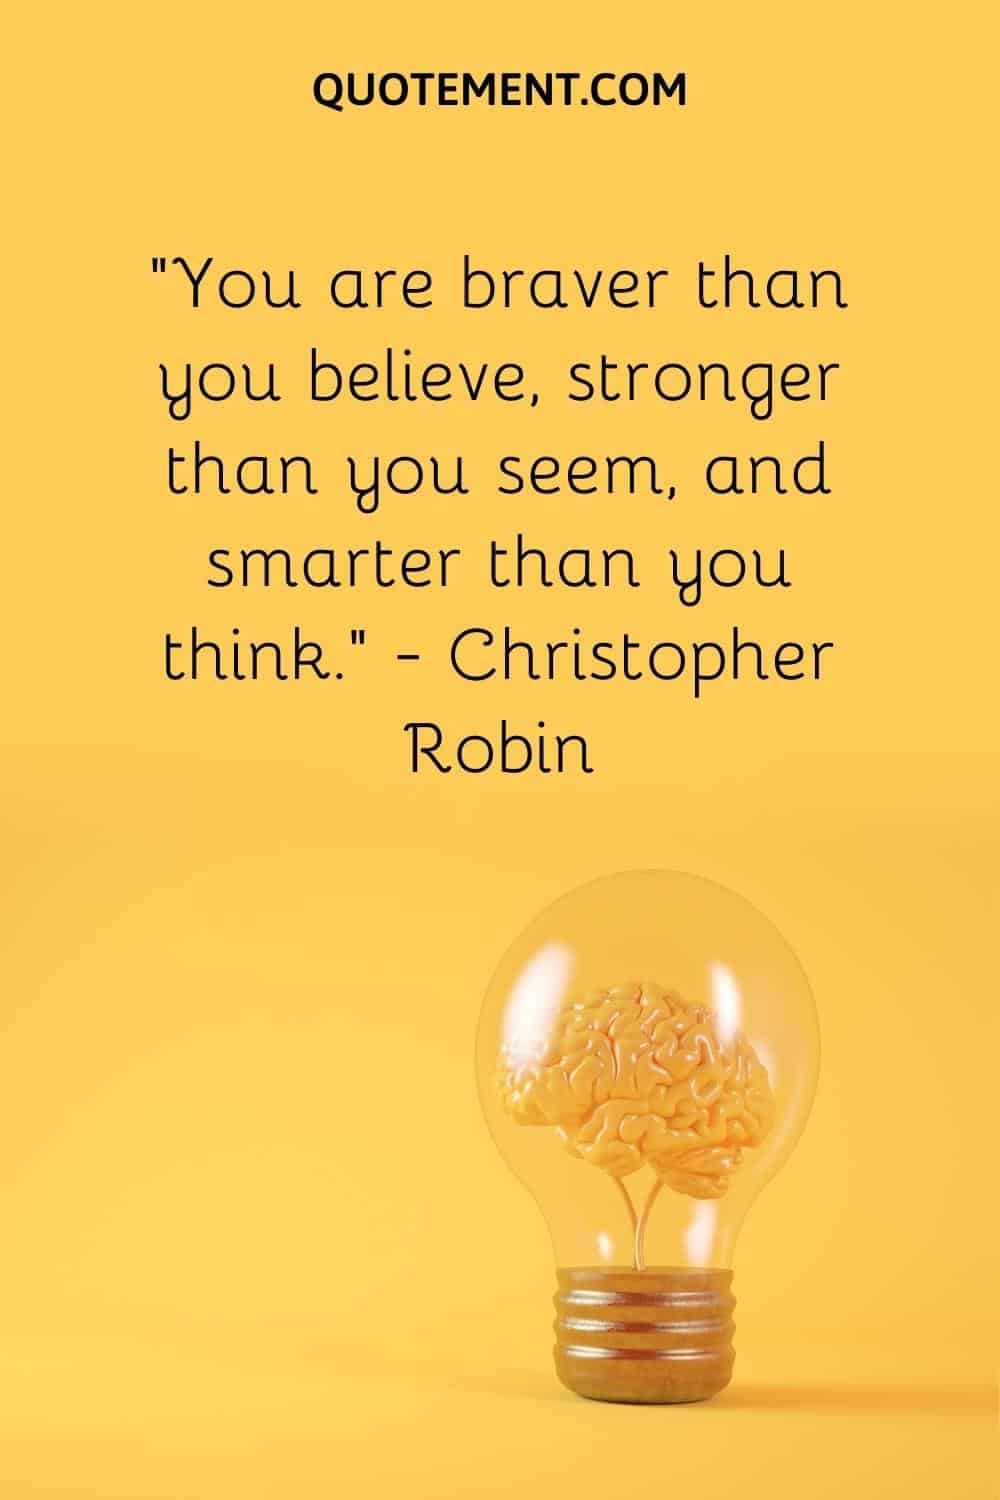 “You are braver than you believe, stronger than you seem, and smarter than you think.” — Christopher Robin